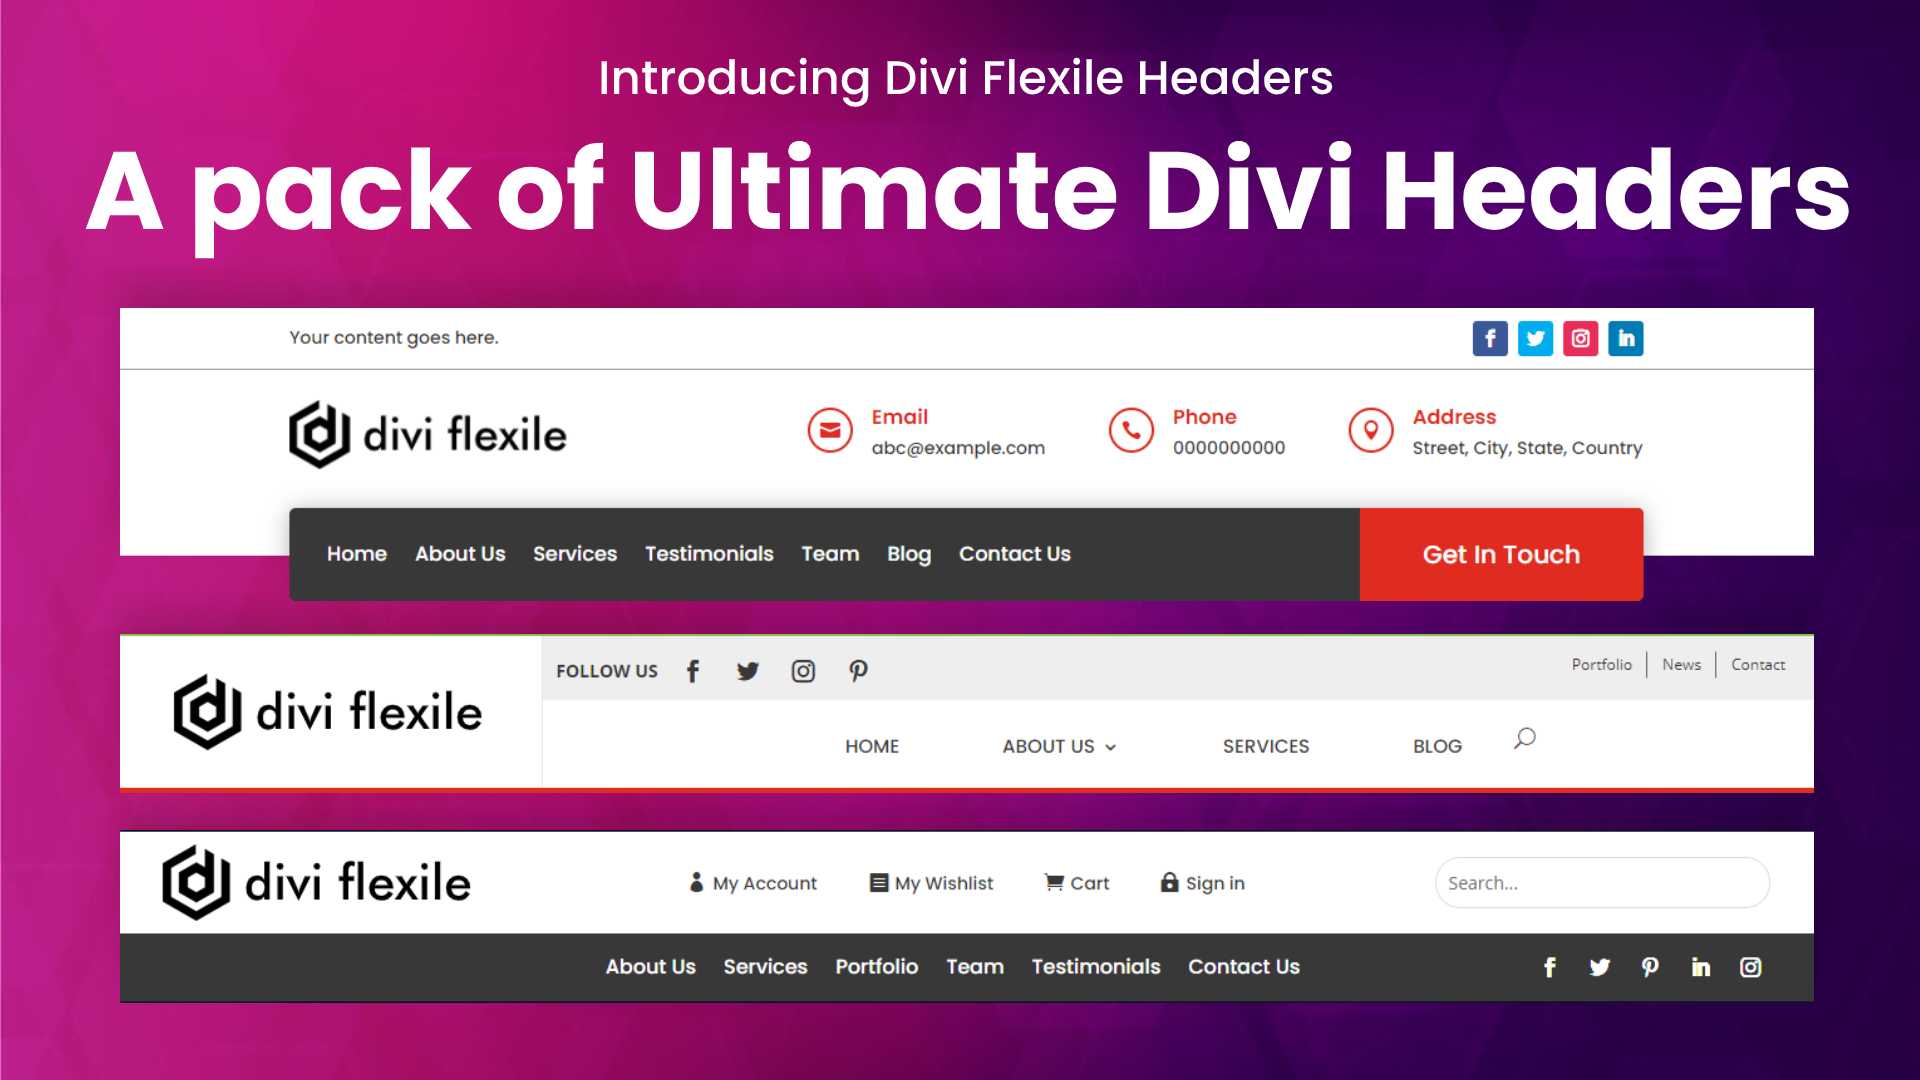 Divi Flexile Headers introductory blog post